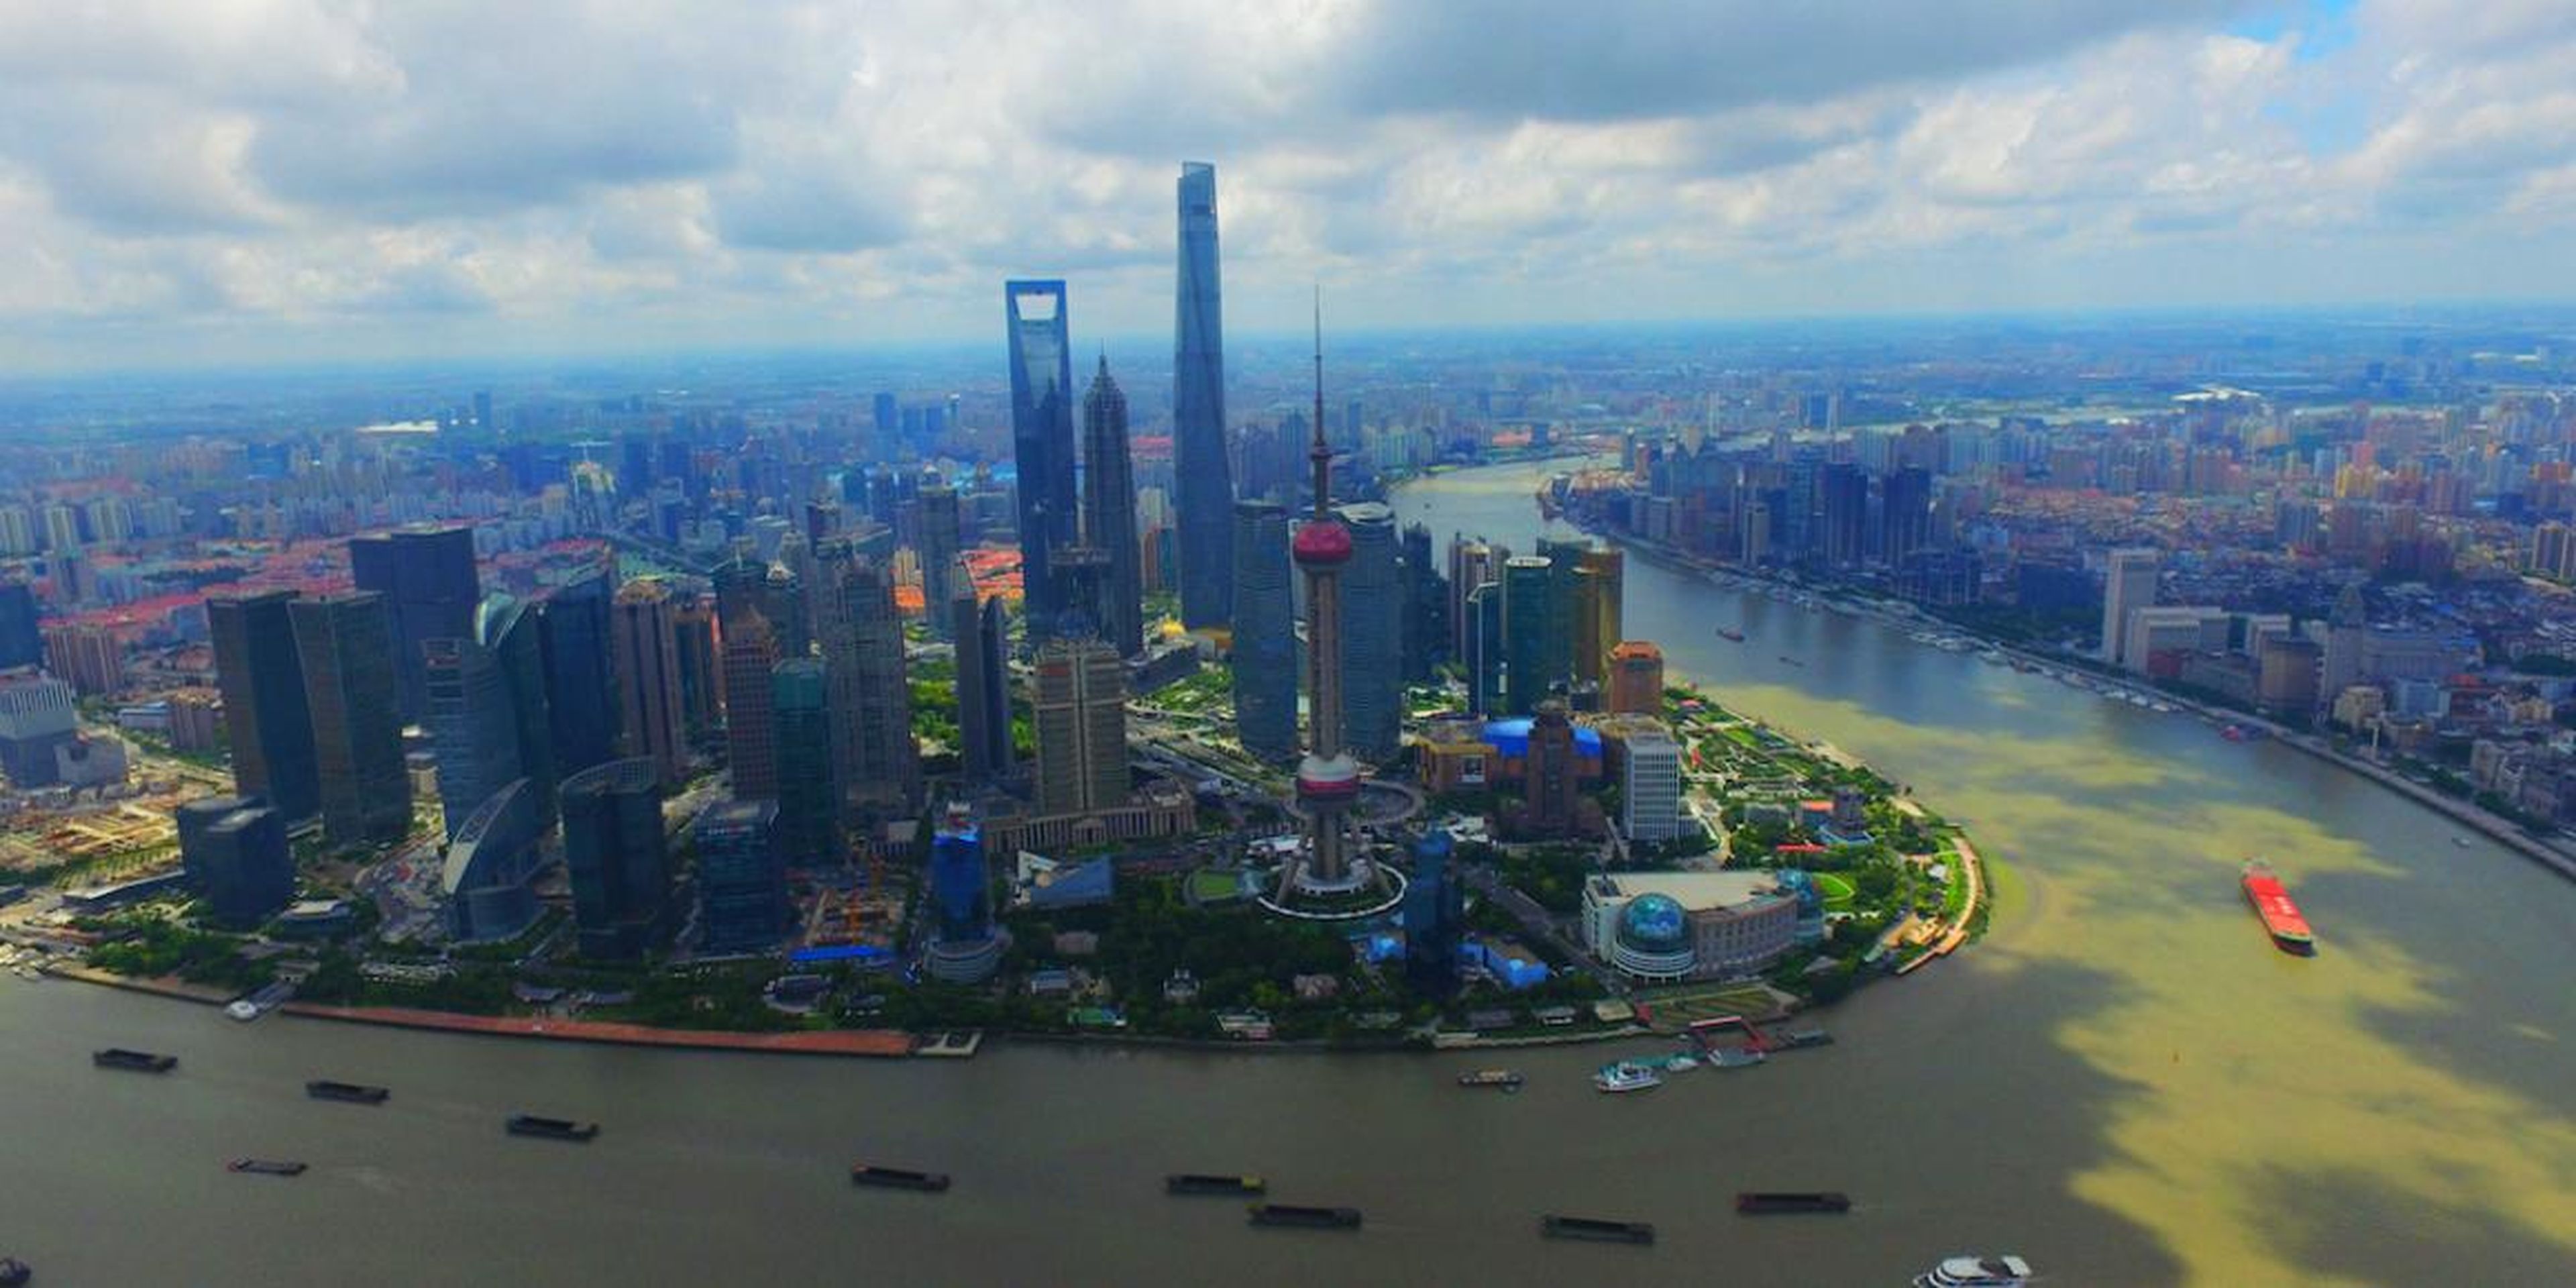 Scientists may find it difficult to single out specific people from analyzing an entire municipal area's wastewater. Shanghai, China's largest city, is home to more than 24 million people.